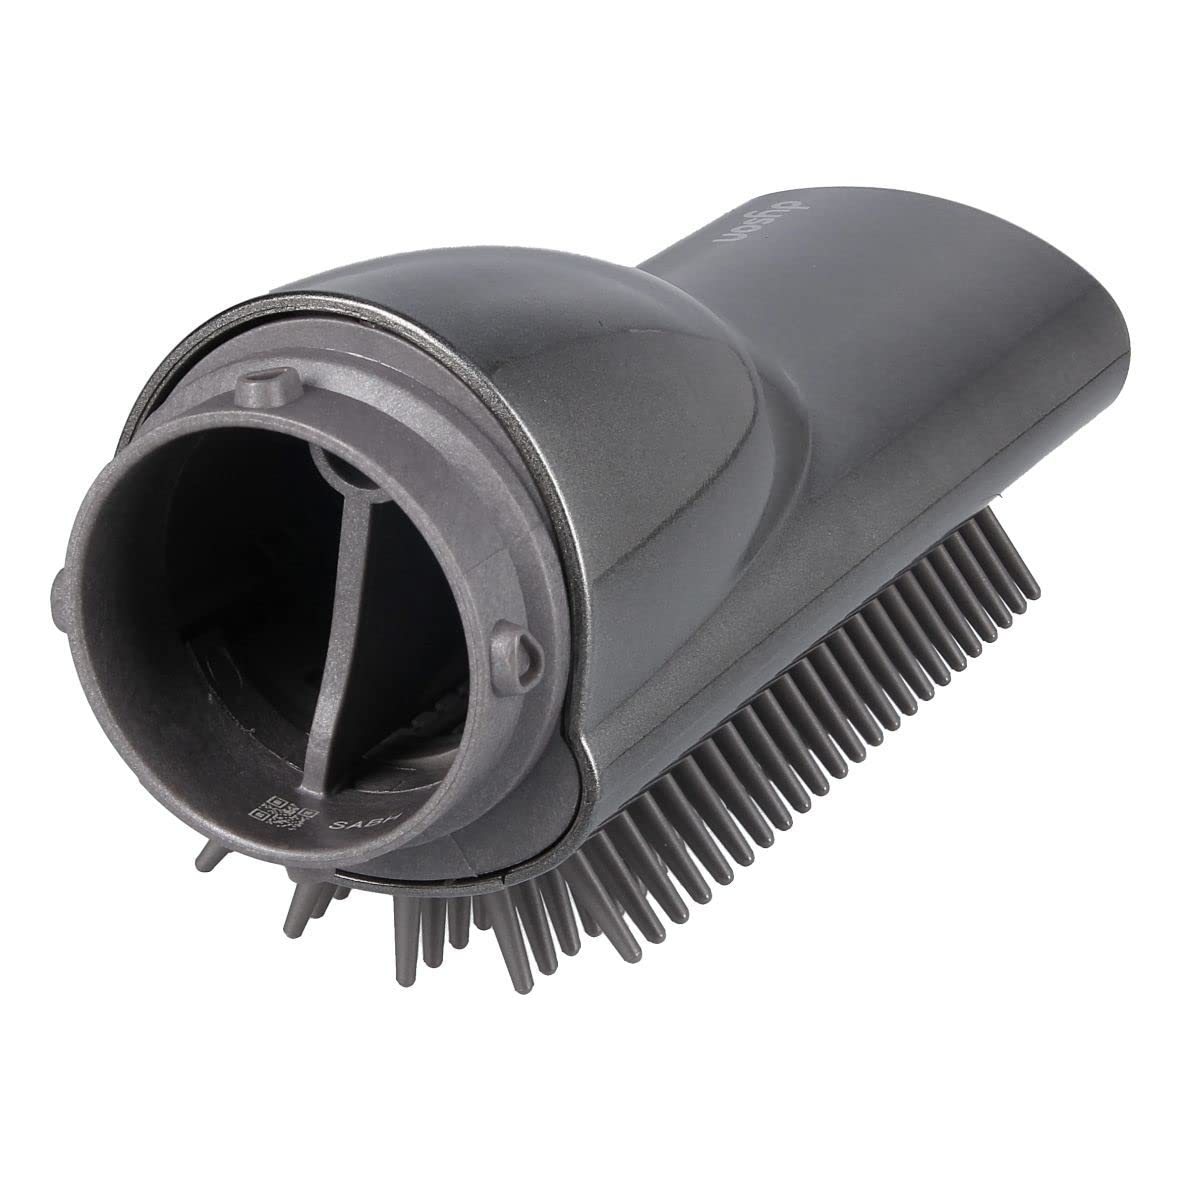 Dyson Airwrap Small Smoothing Brush